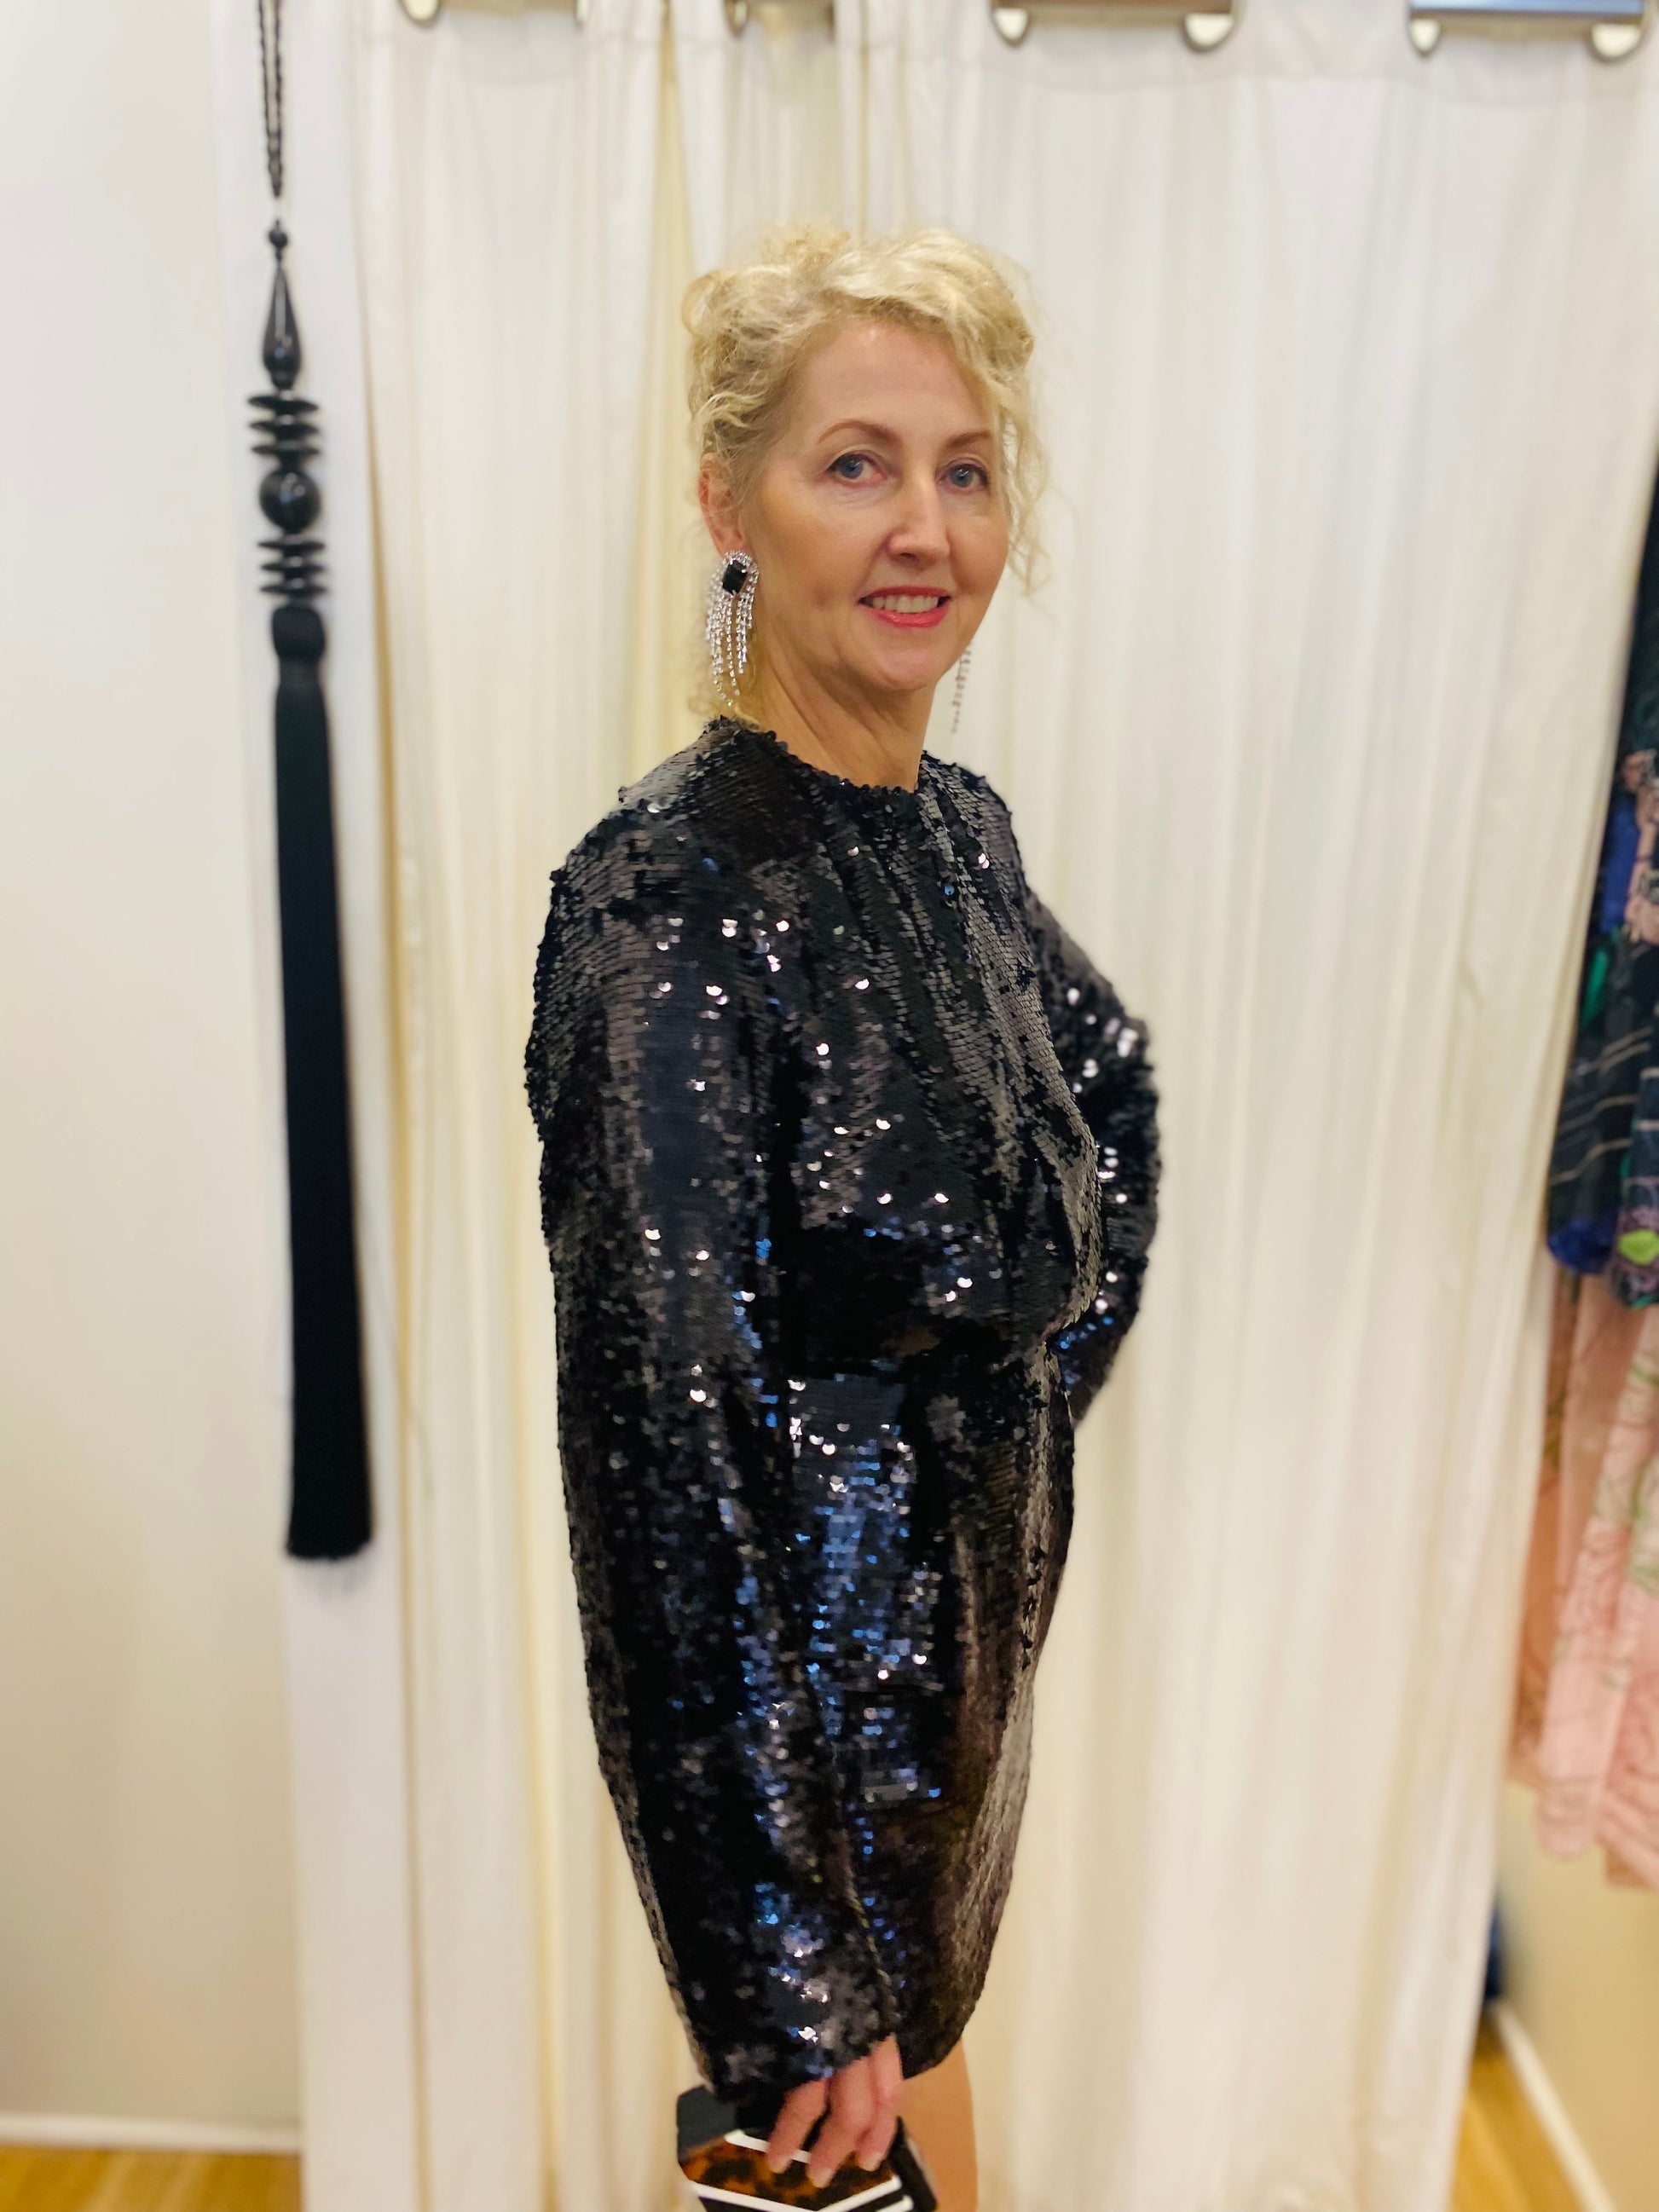 SABINA MUSAYEV SEQUIN CLYDE DRESS - Bread Boutique  - absolutely stunning, asymmetrical, dress, EMBELLISHED, GLAMOROUS, GORGEOUS, SABINA MUSAYEV, sequin, SEXY, SHIMMER, sleeved, SOFT, SOPHISTICATED, STUNNING, stylish, SUPERB, WAISTED - Darwin boutique - Darwin fashion